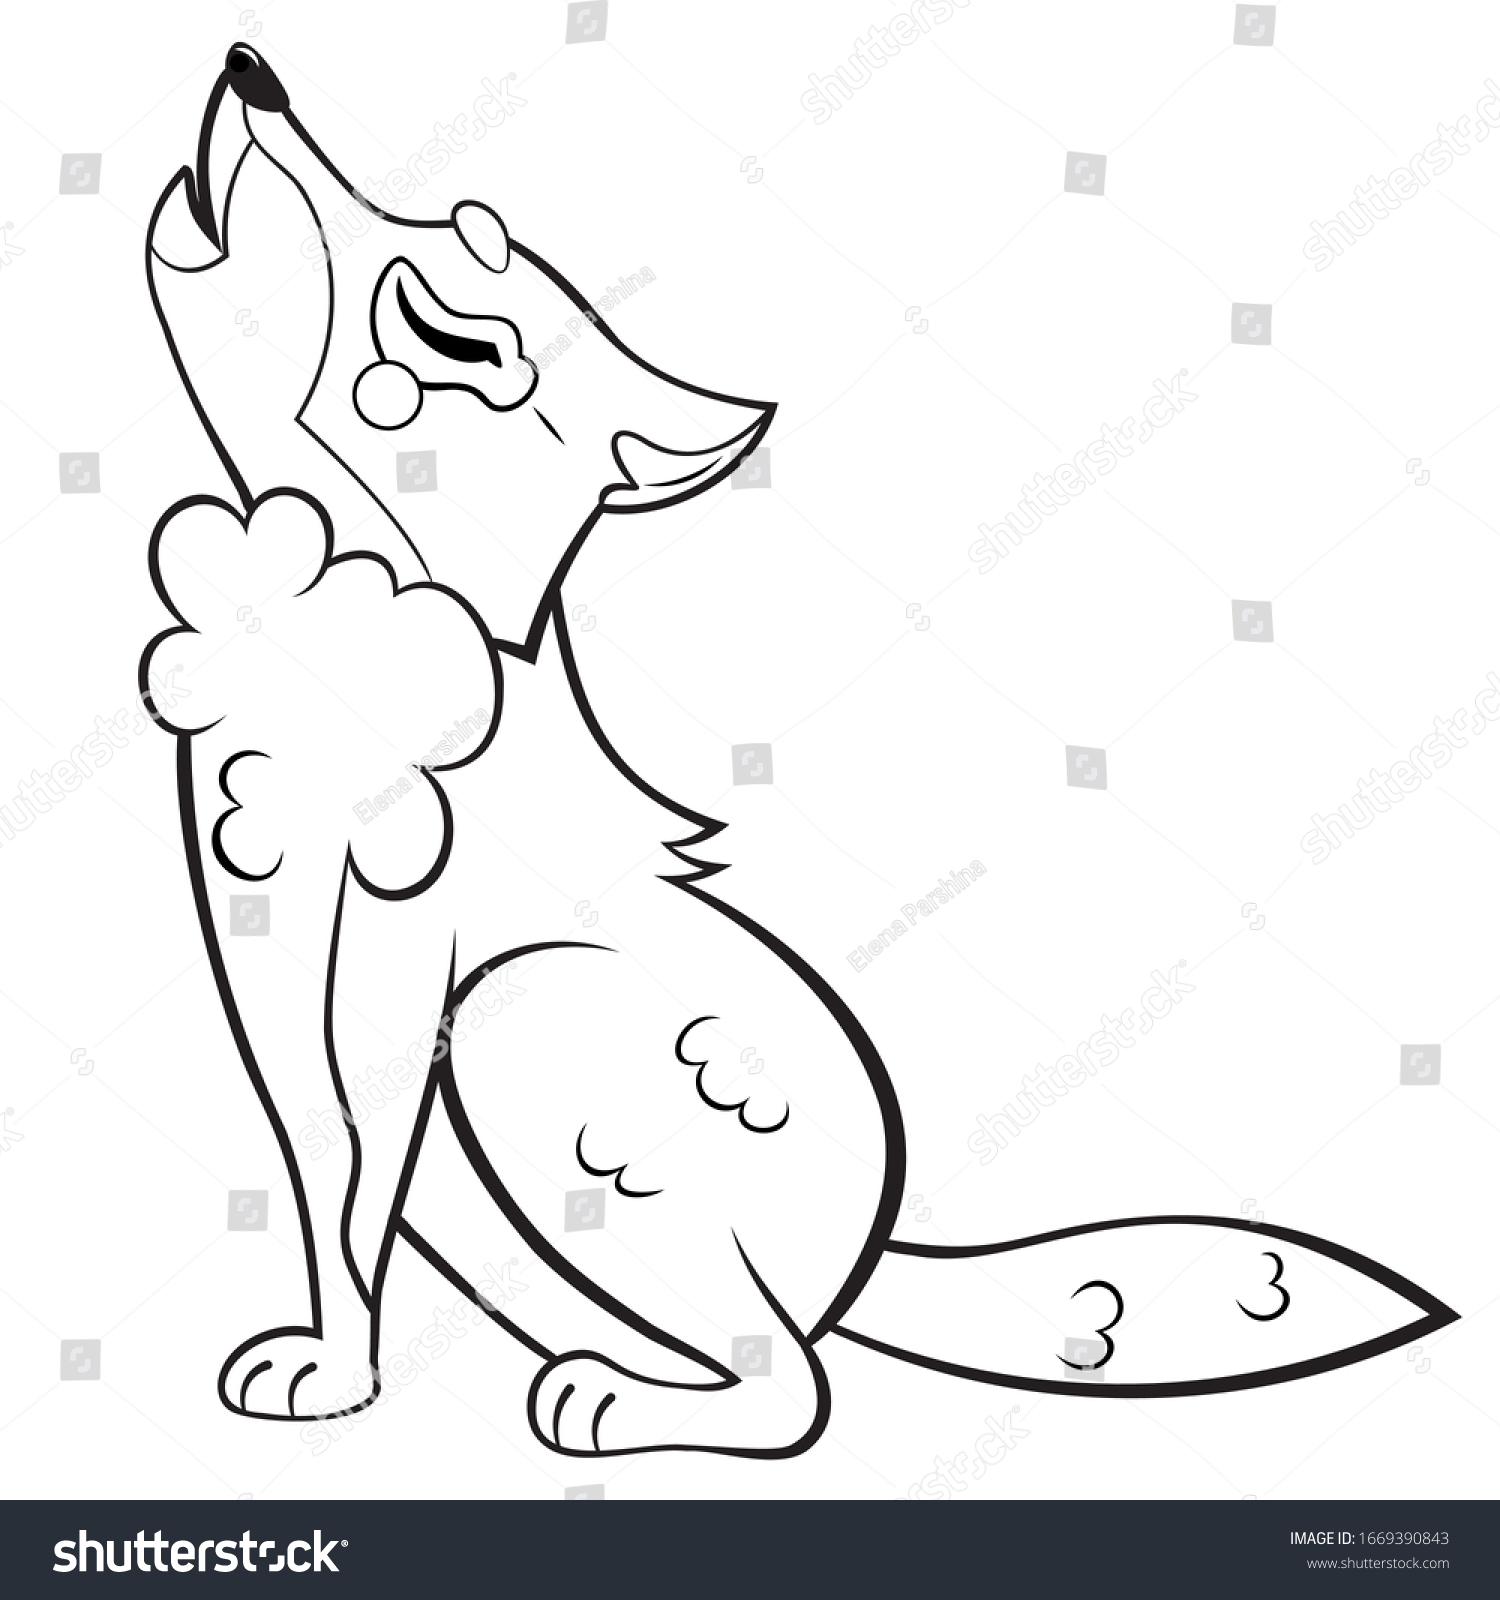 Coloring Page Outline Cute Cartoon Howling Stock Vector (Royalty Free ...